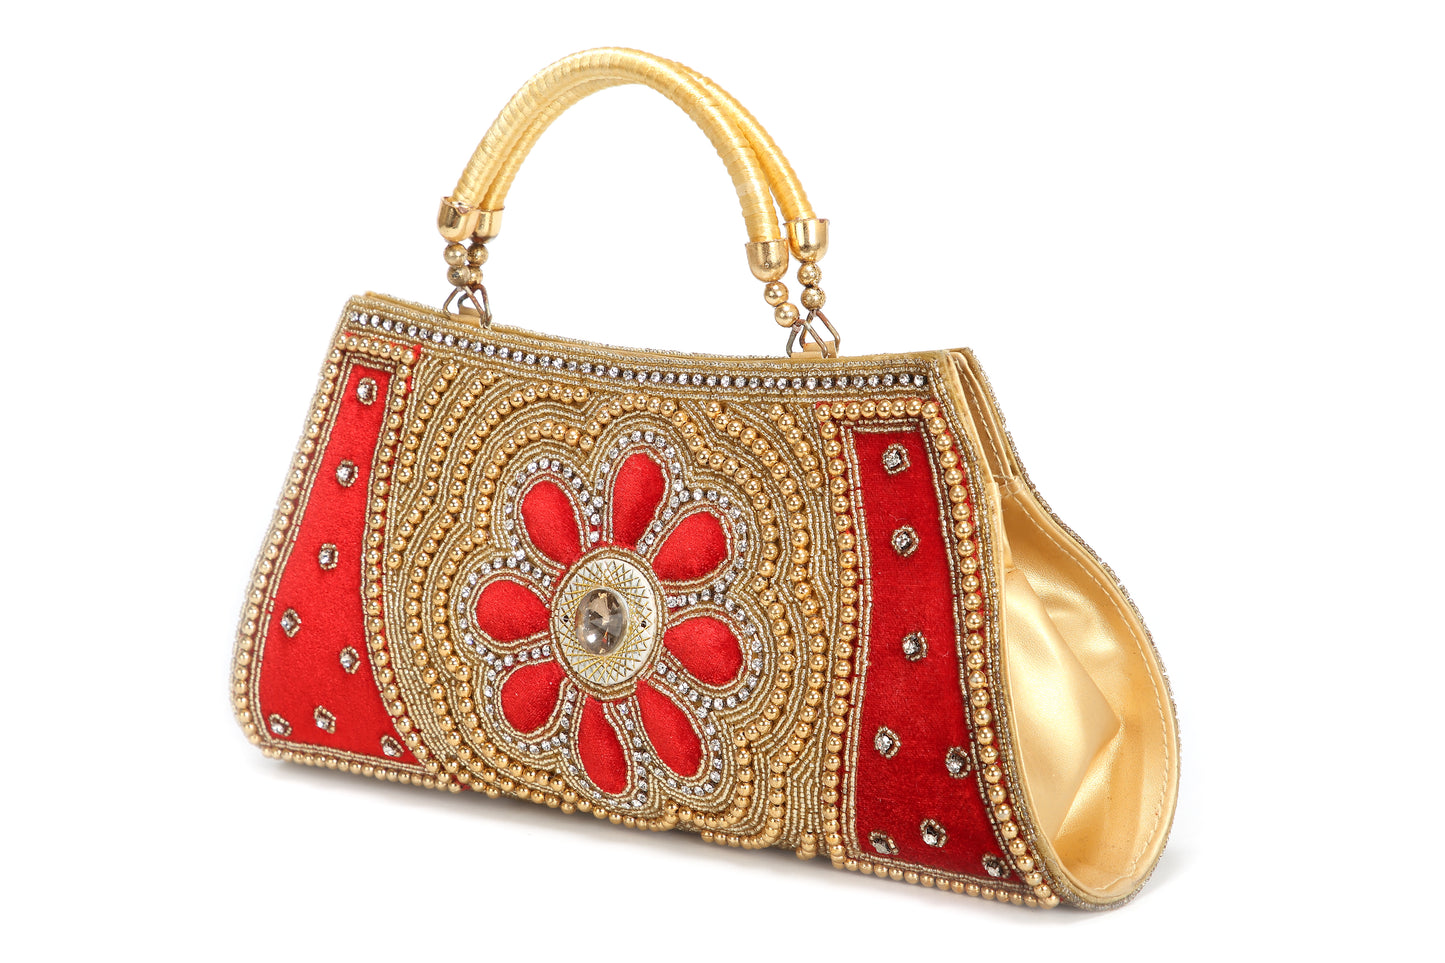 Floral Embroidered & Sequin Ladies Clutch - Maxim Creation